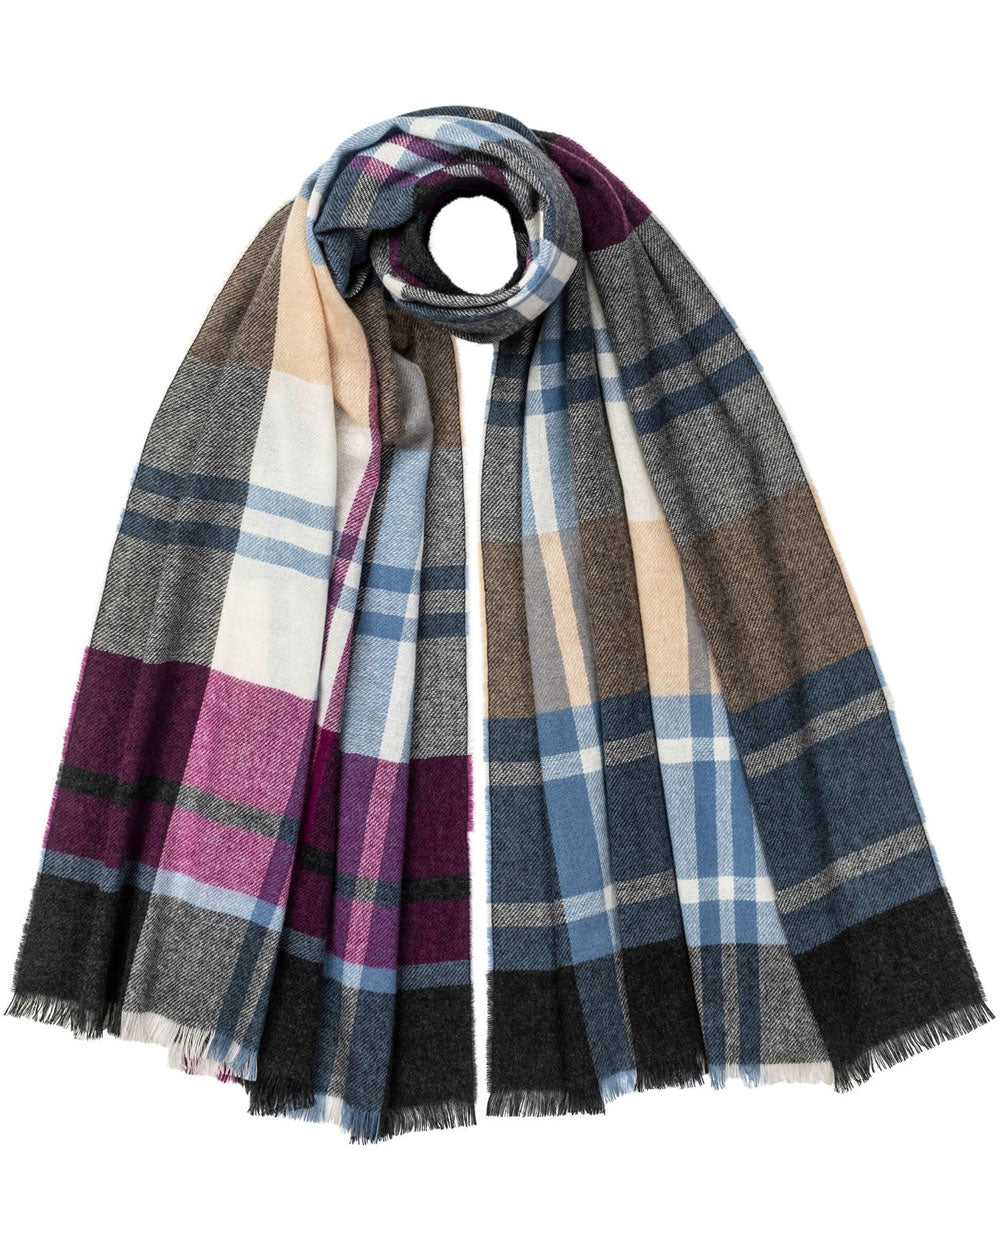 Cashmere Oversized Check Stole in Charcoal